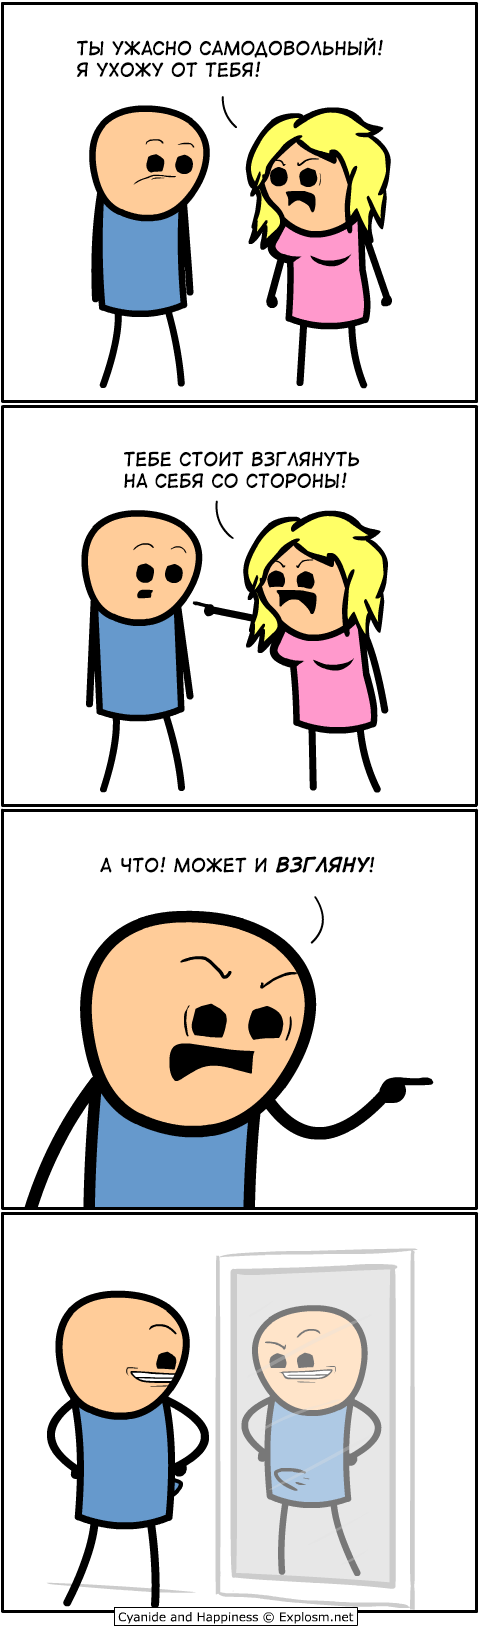    , Cyanide and Happiness, 